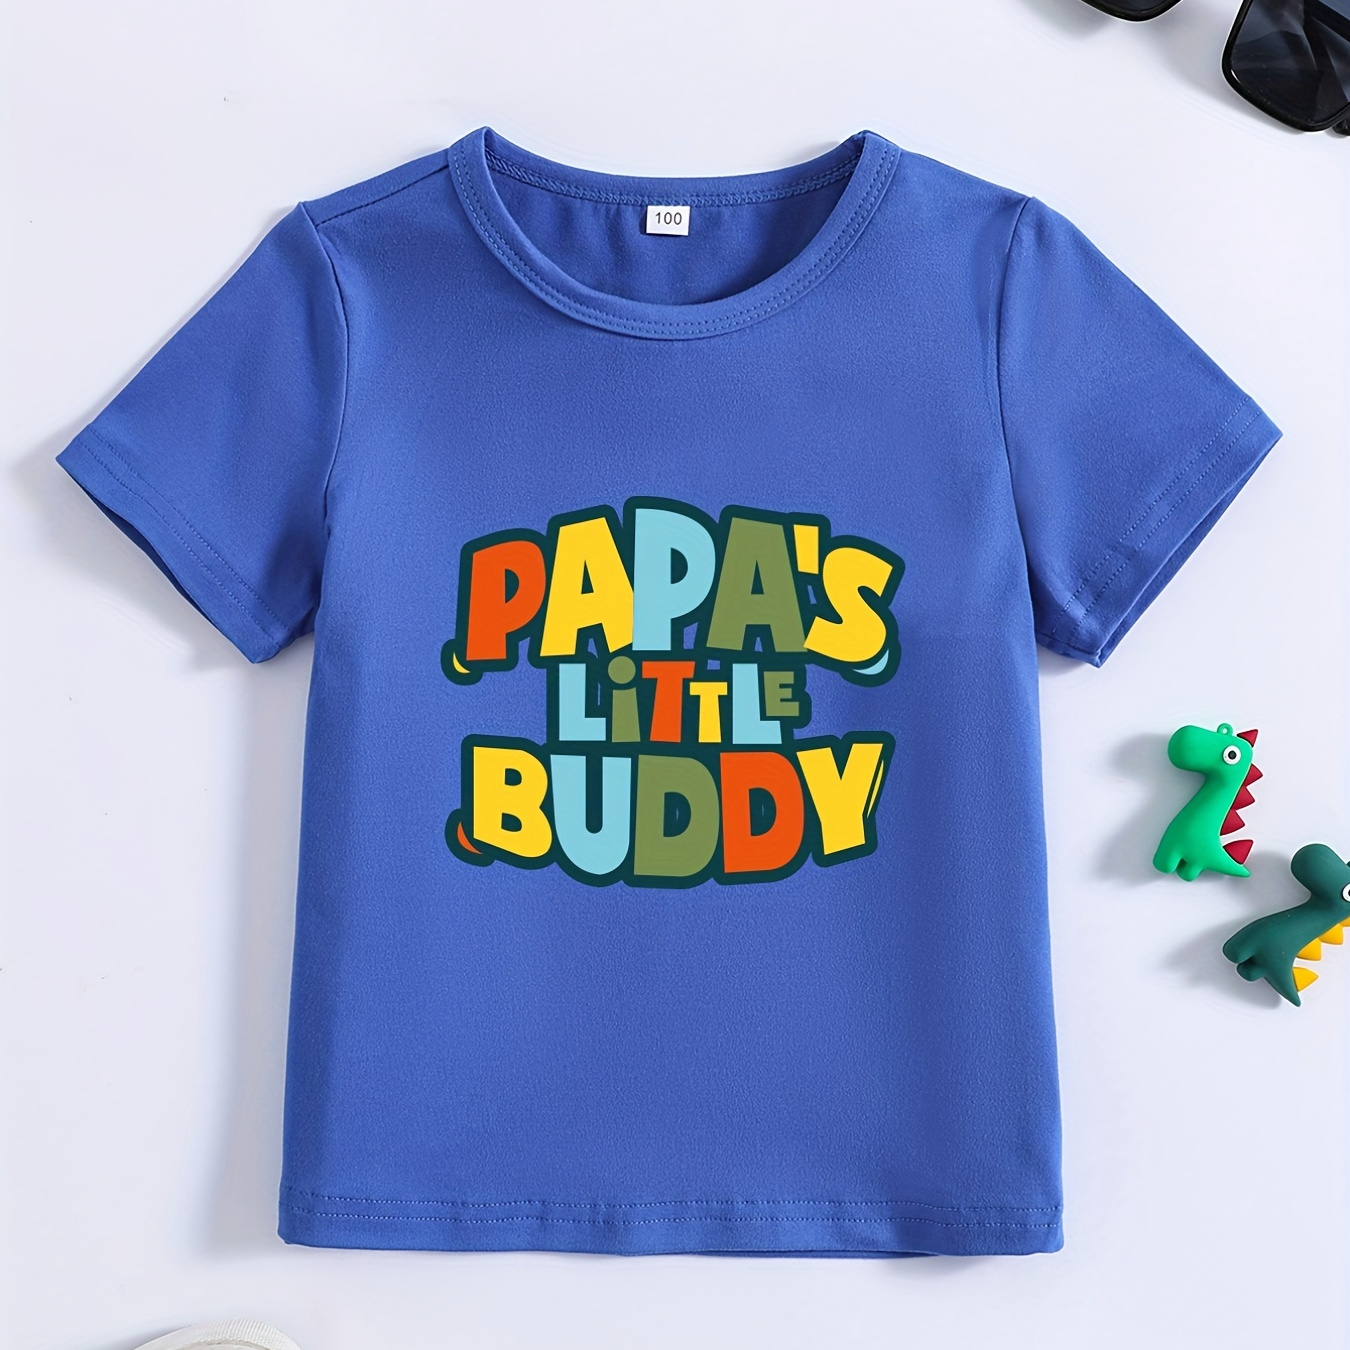 

Stylish Papa's Little Buddy Letter Print Boys Creative T-shirt, Casual Lightweight Comfy Short Sleeve Crew Neck Tee Tops, Kids Clothings For Summer